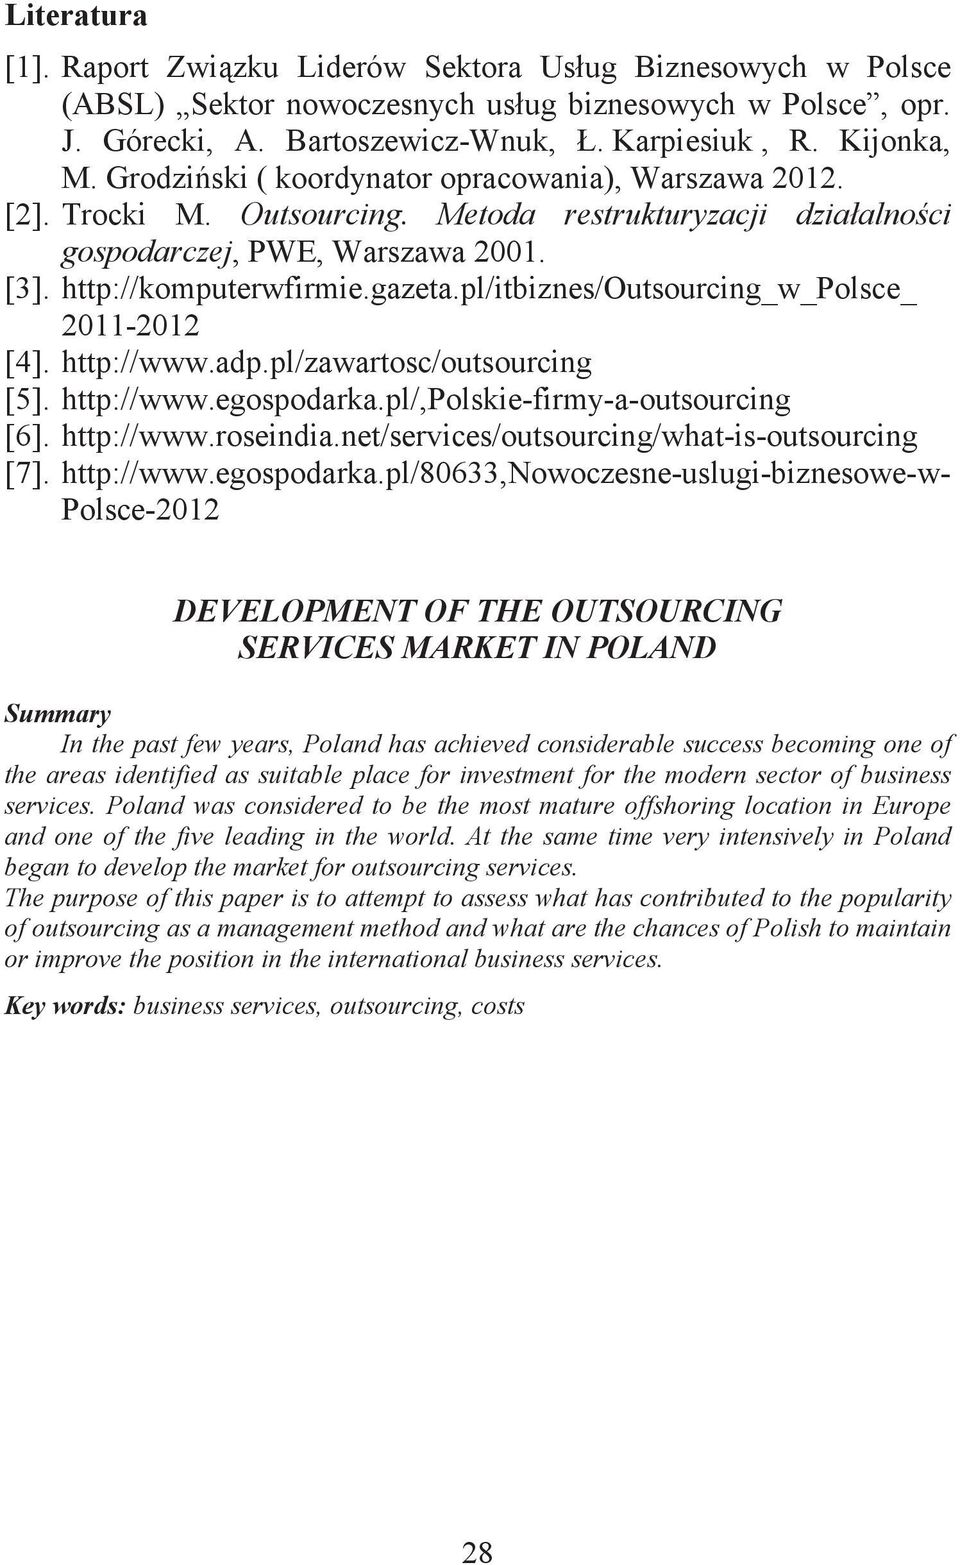 pl/itbiznes/outsourcing_w_polsce_ 2011-2012 [4]. http://www.adp.pl/zawartosc/outsourcing [5]. http://www.egospodarka.pl/,polskie-firmy-a-outsourcing [6]. http://www.roseindia.